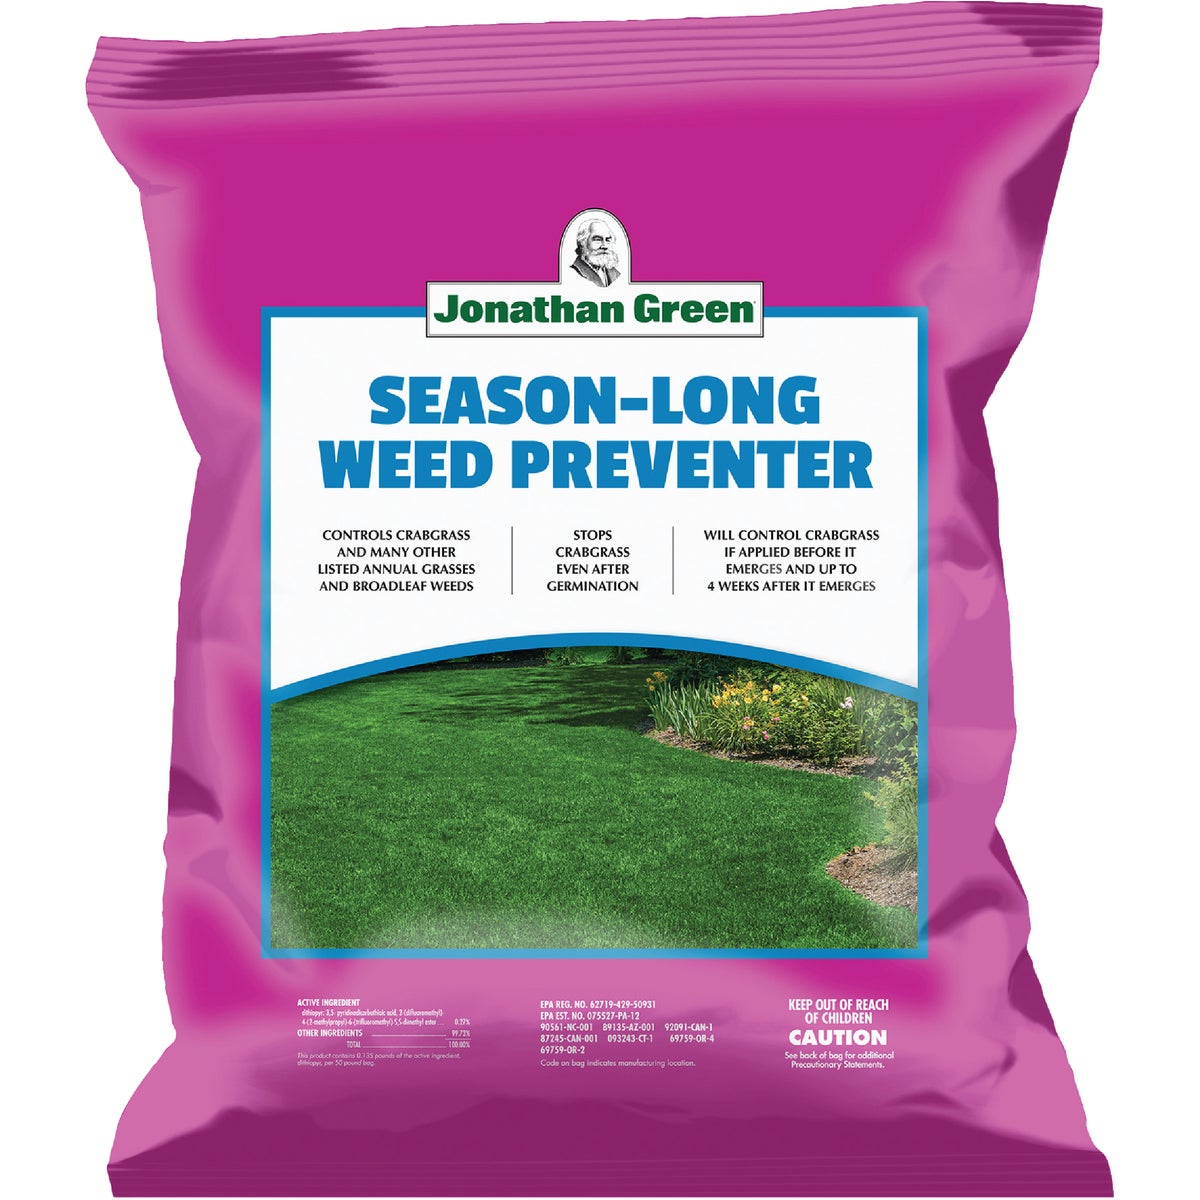 Item 703572, Crabgrass and weed preventer for lawn and landscape areas.